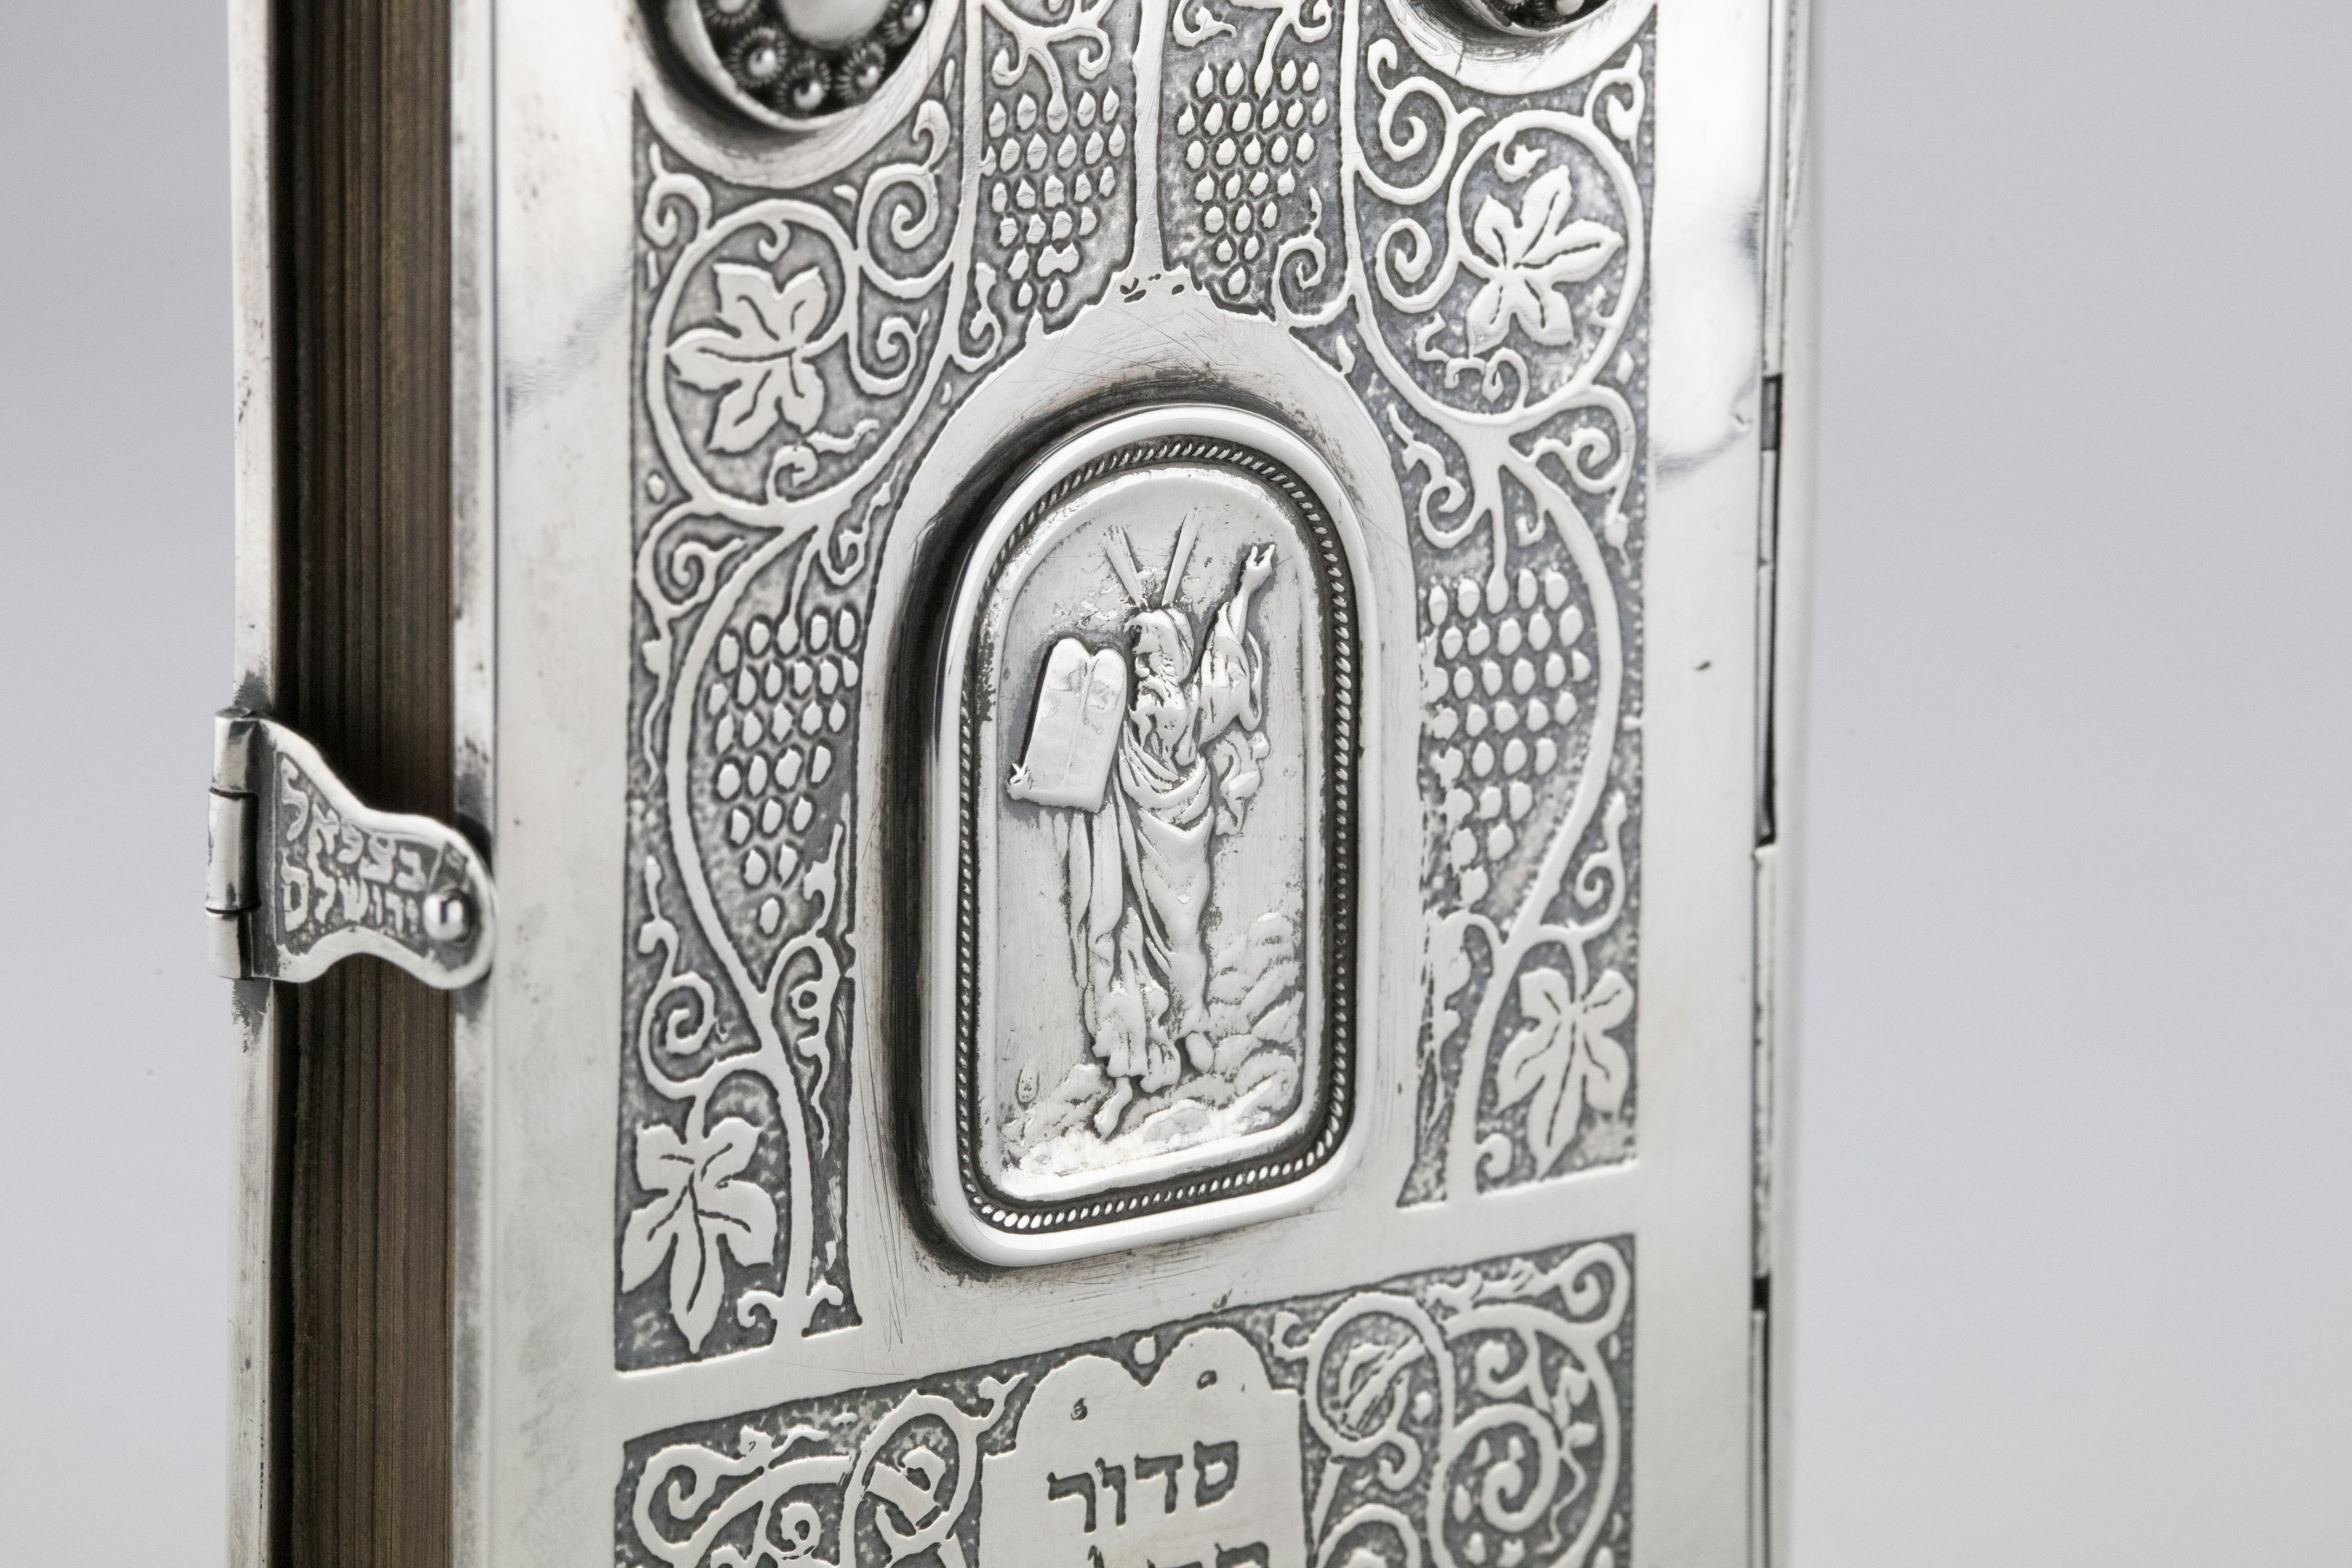 Sterling Silver book binding with the original Siddur by Bezalel school, Jerusalem, Israel, circa 1950.
On the front binding is a medallion showing Moses carrying the Tablets of the Law. Curving vine twigs and clusters of grapes are etched all